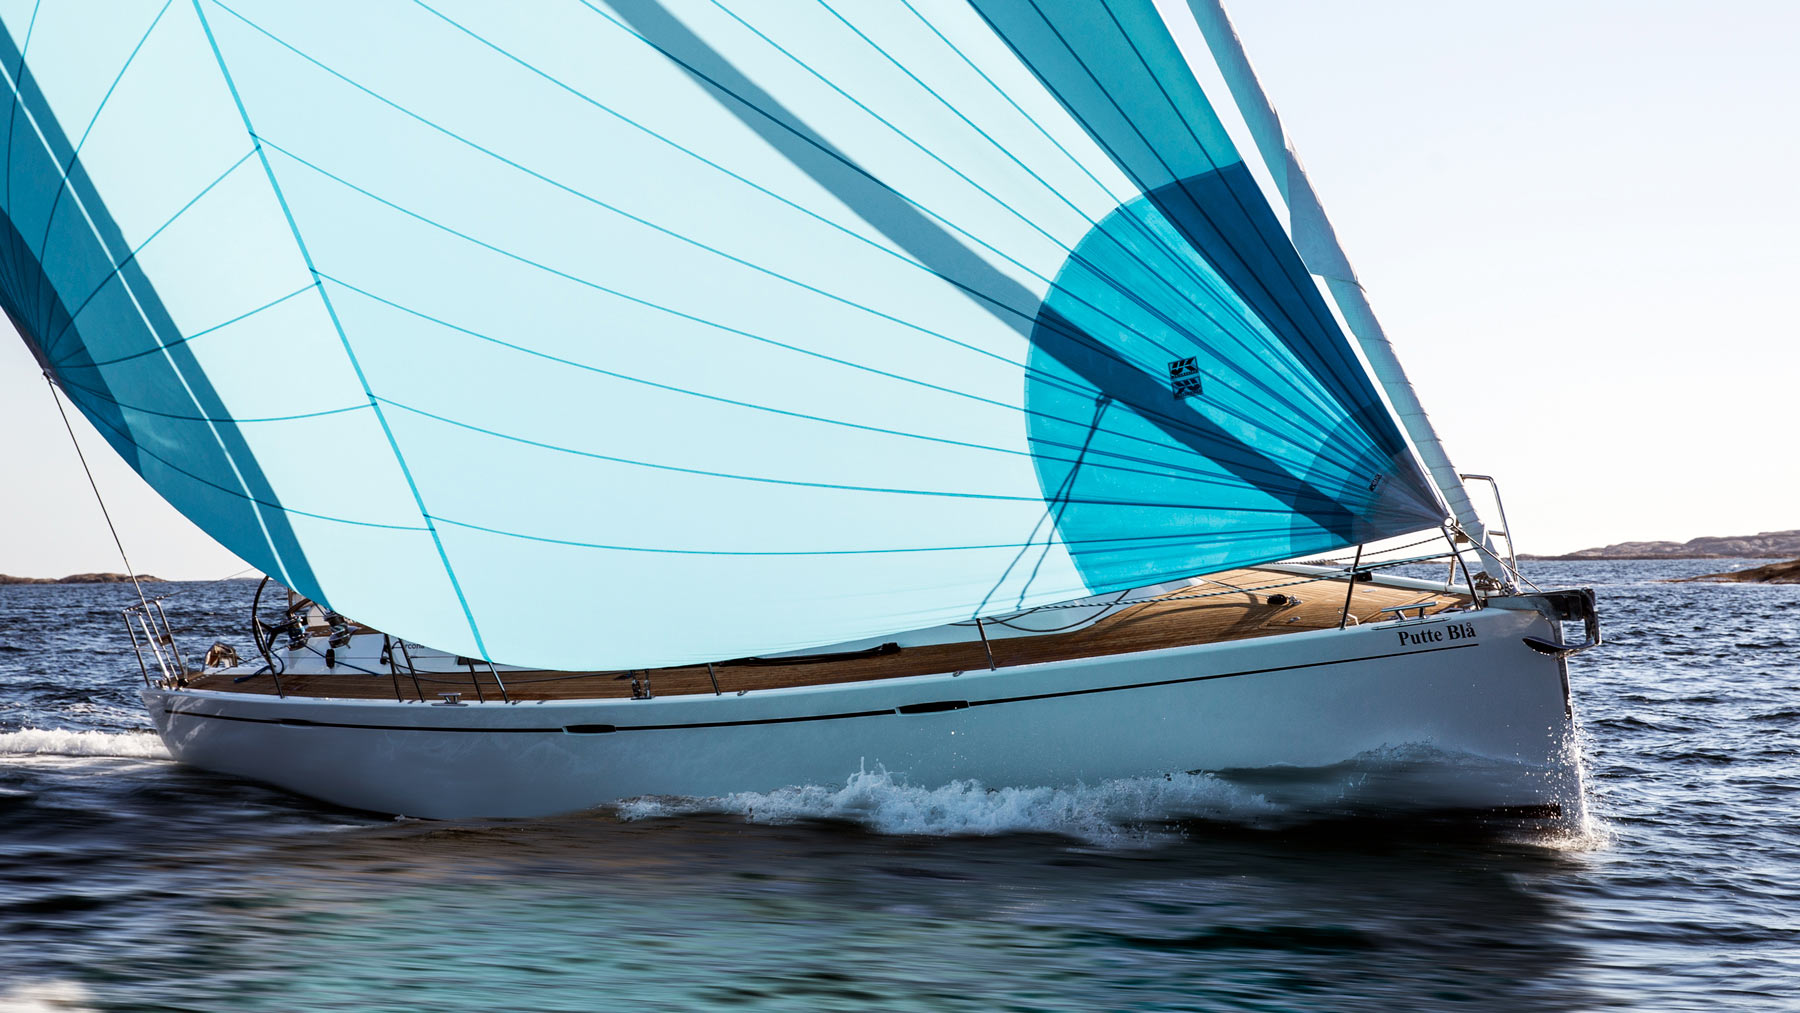 The Arcona 435 on test by PlanetSail